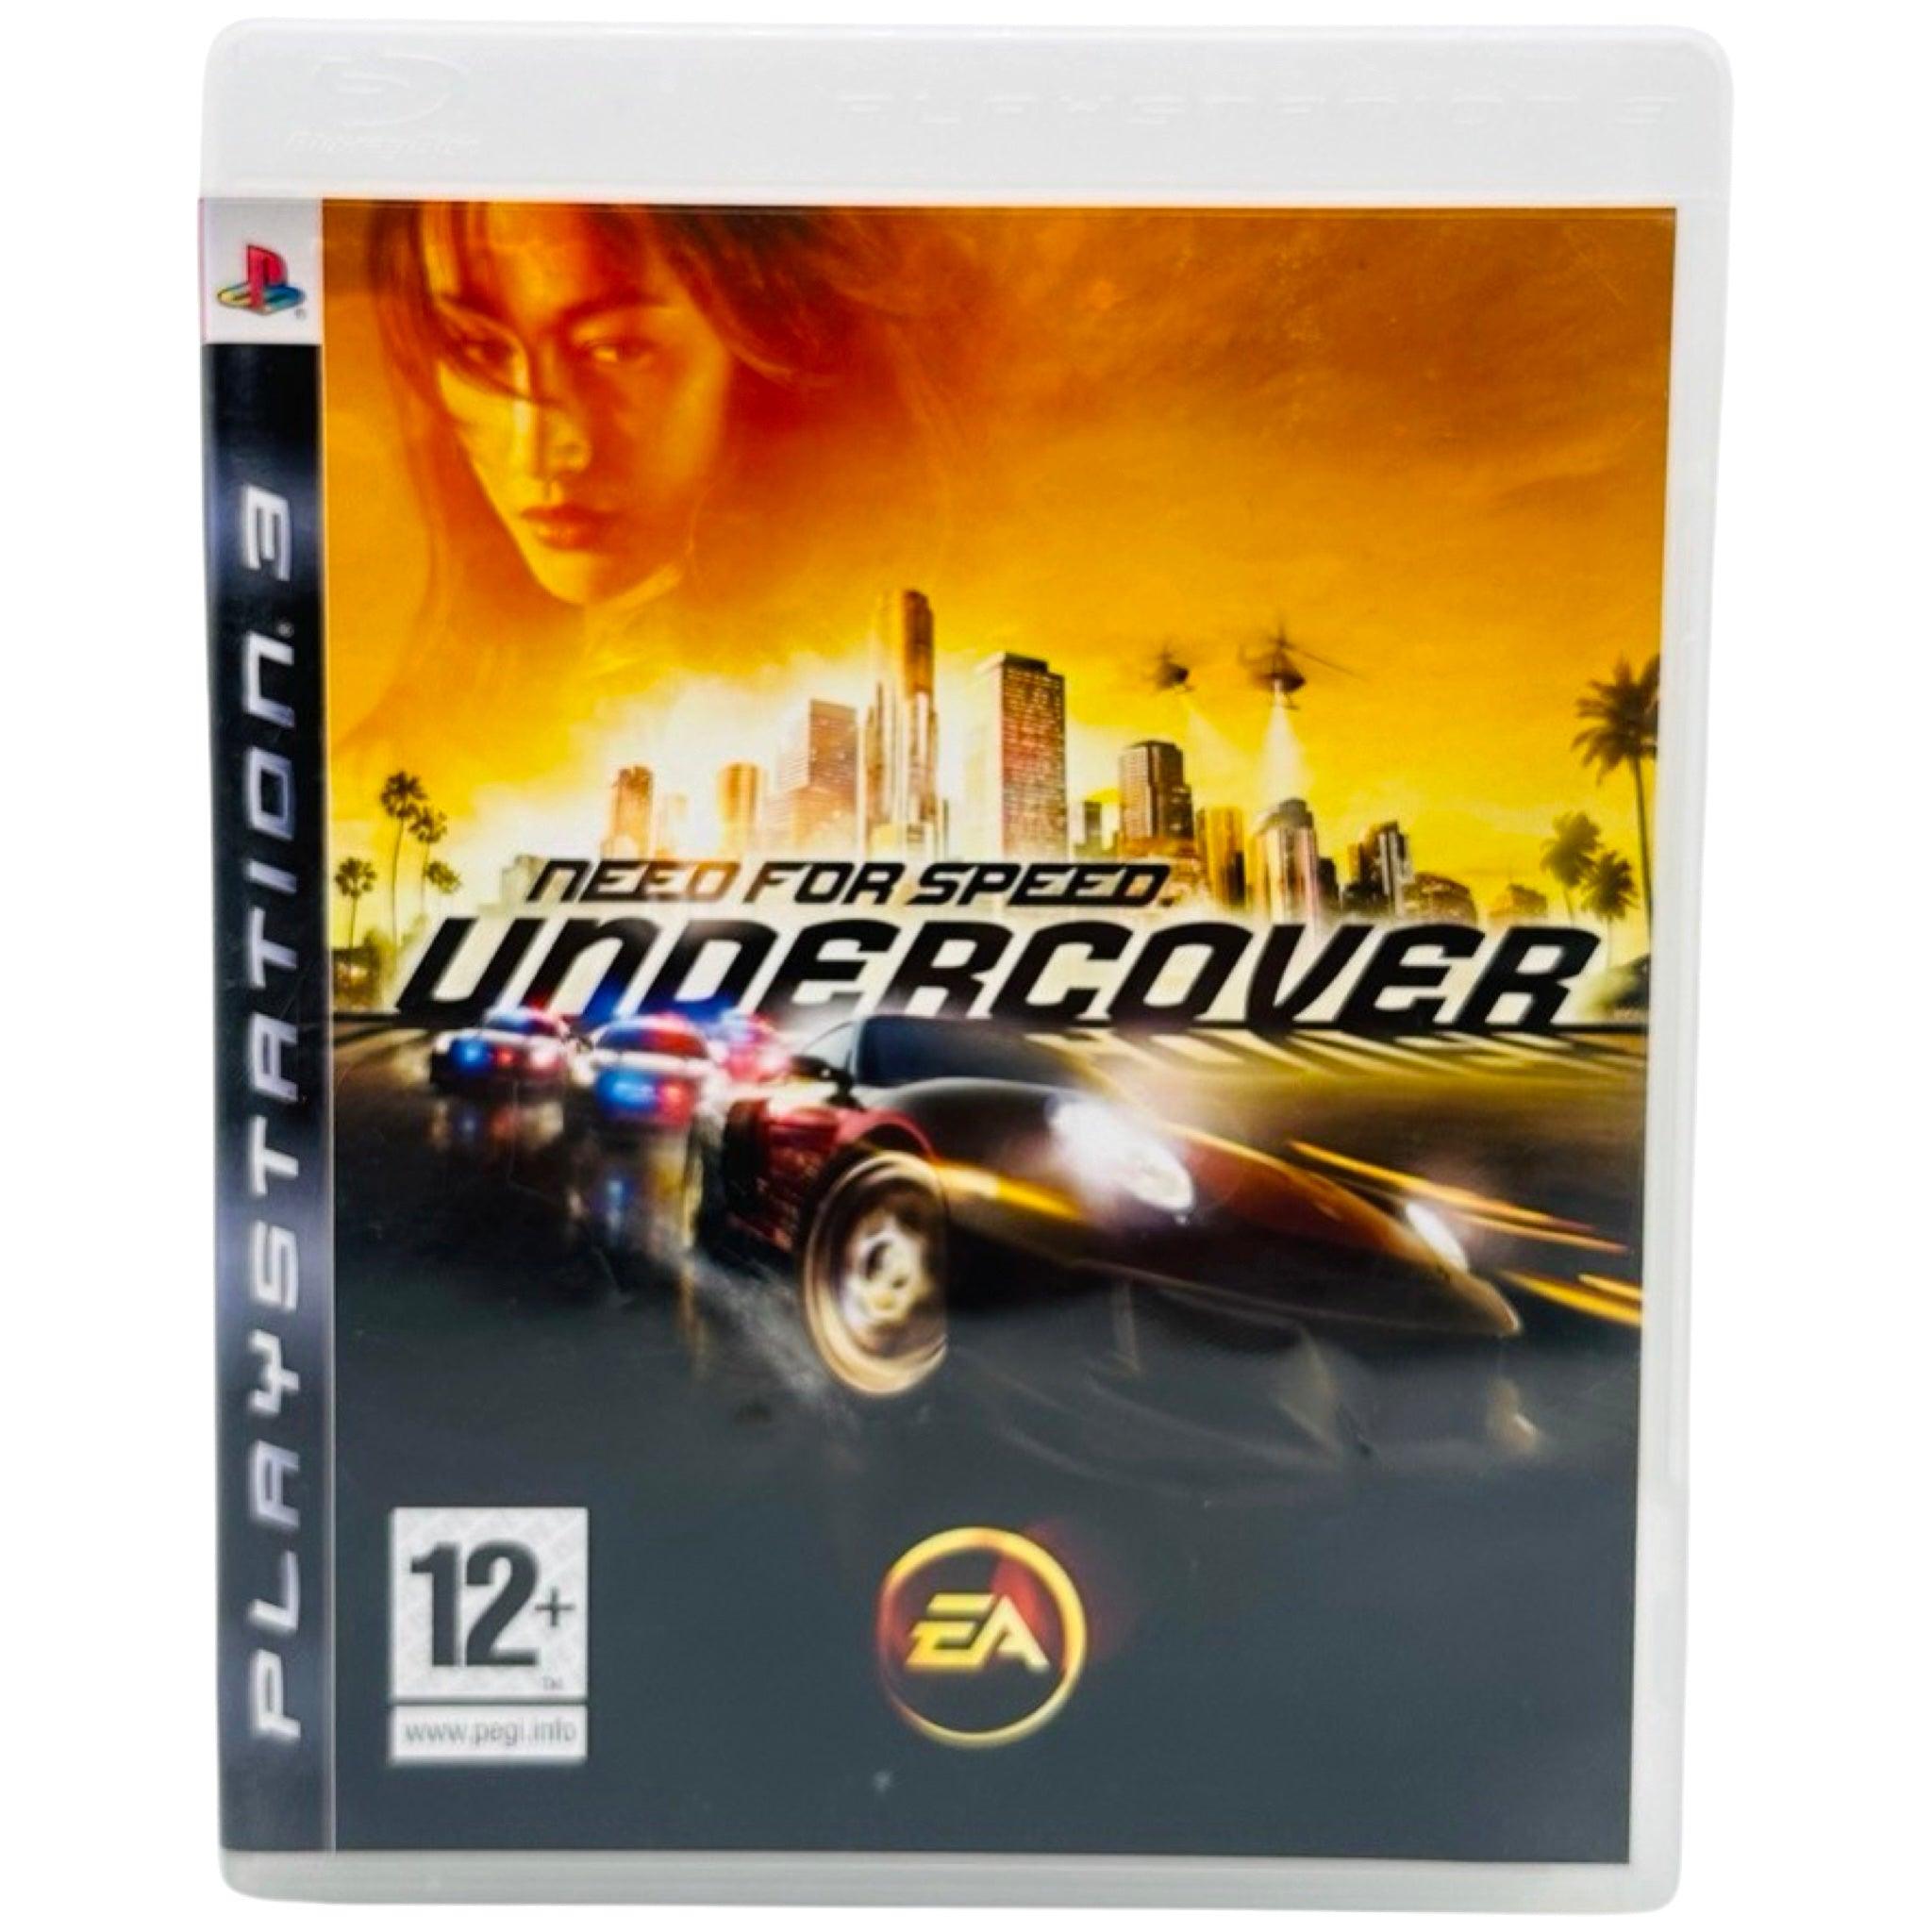 PS3: Need For Speed: Undercover - RetroGaming.no